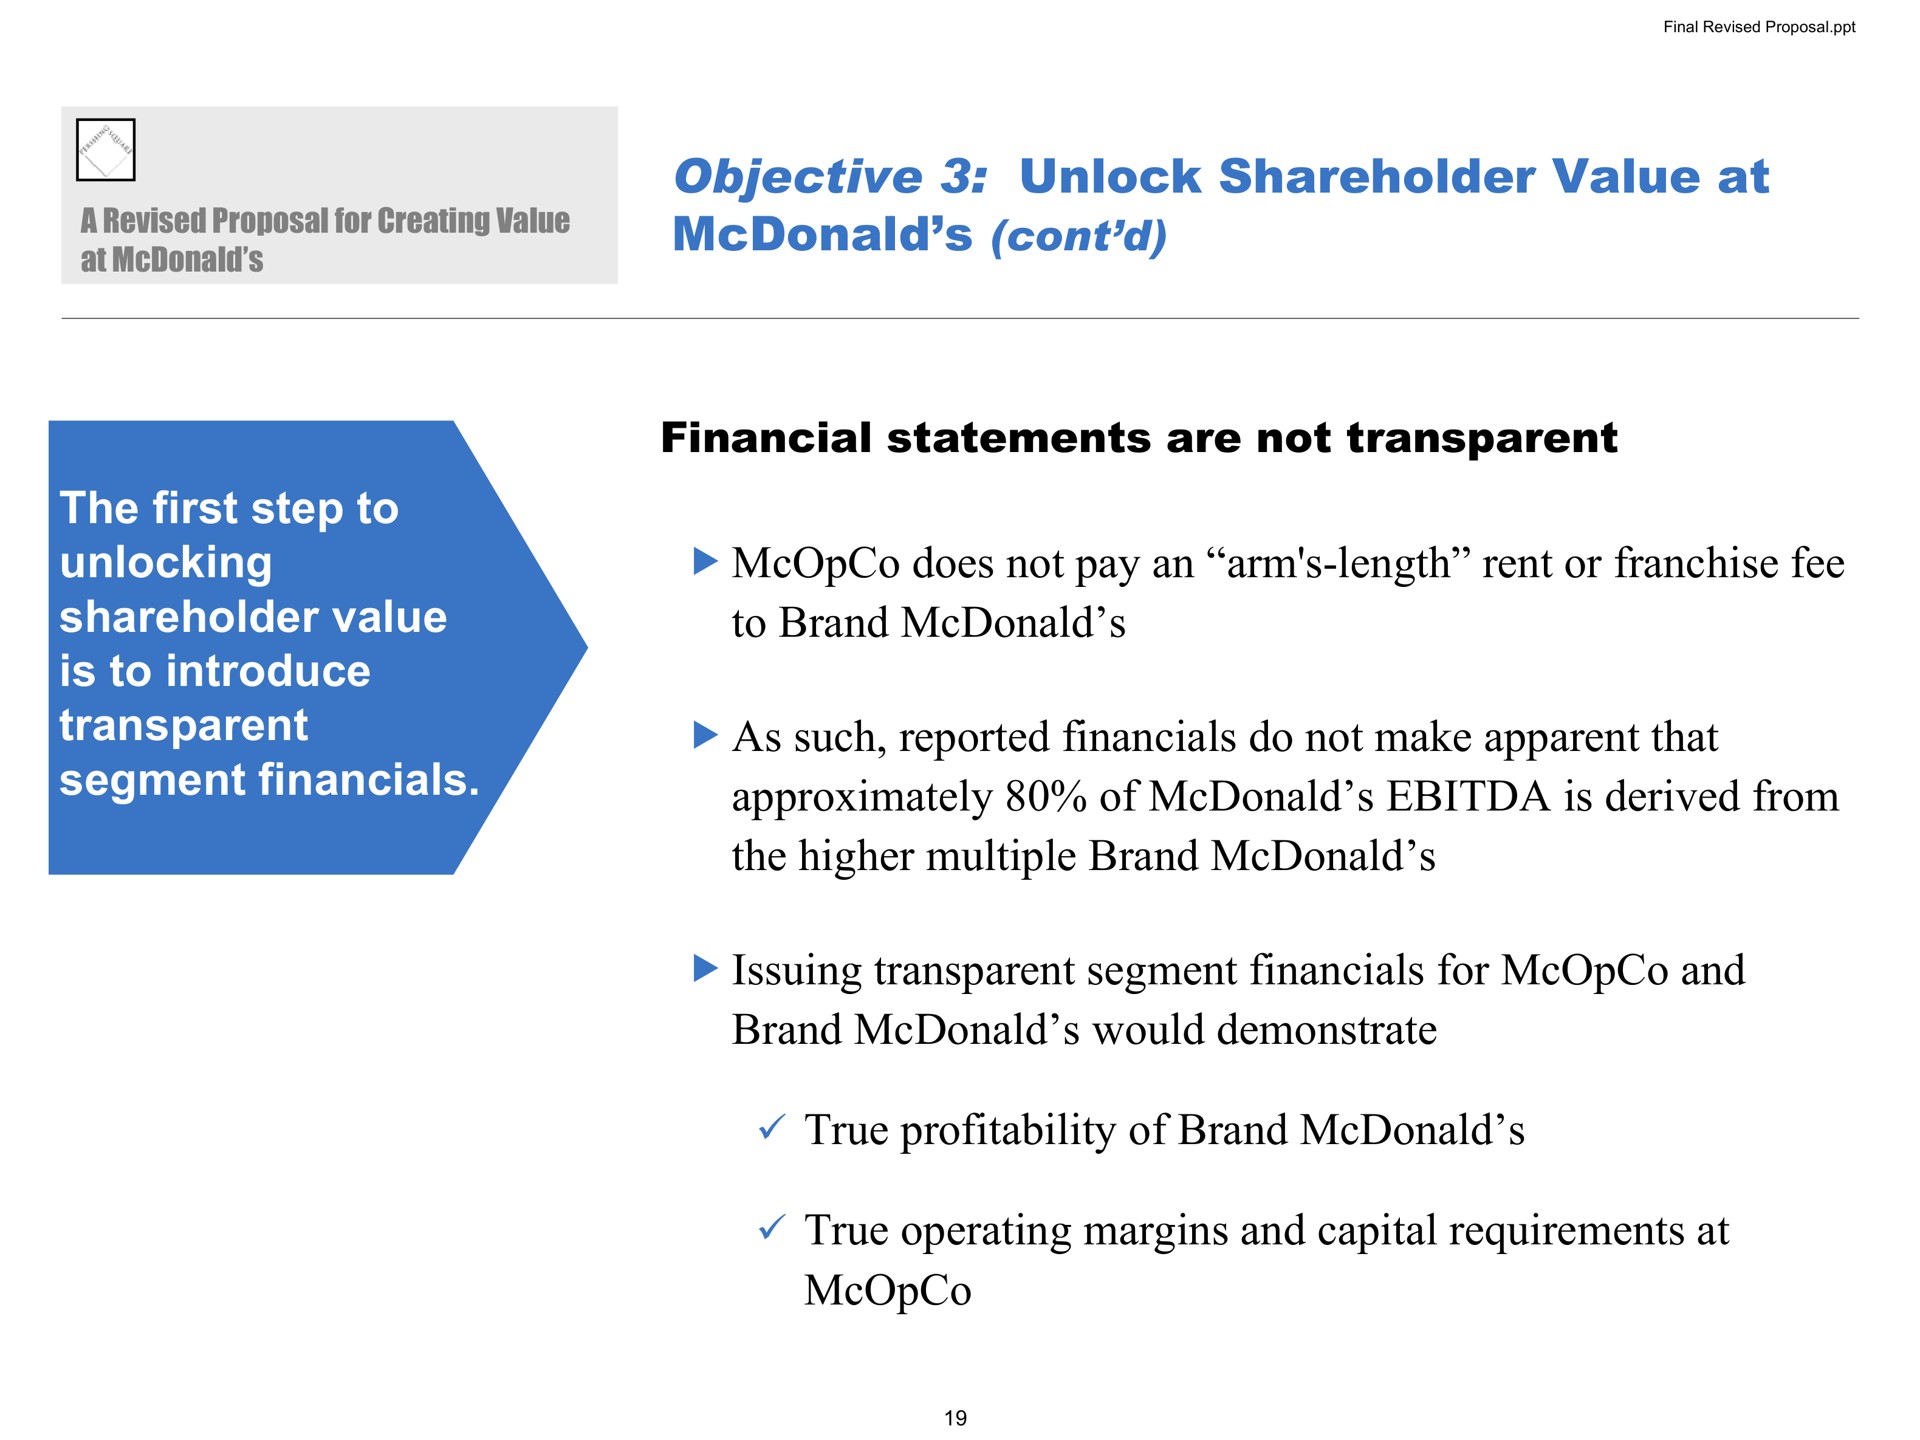 objective unlock shareholder value at the first step to unlocking shareholder value is to introduce transparent segment financial statements are not transparent does not pay an arm length rent or franchise fee to brand as such reported do not make apparent that approximately of is derived from the higher multiple brand issuing transparent segment for and brand would demonstrate true profitability of brand true operating margins and capital requirements at | Pershing Square